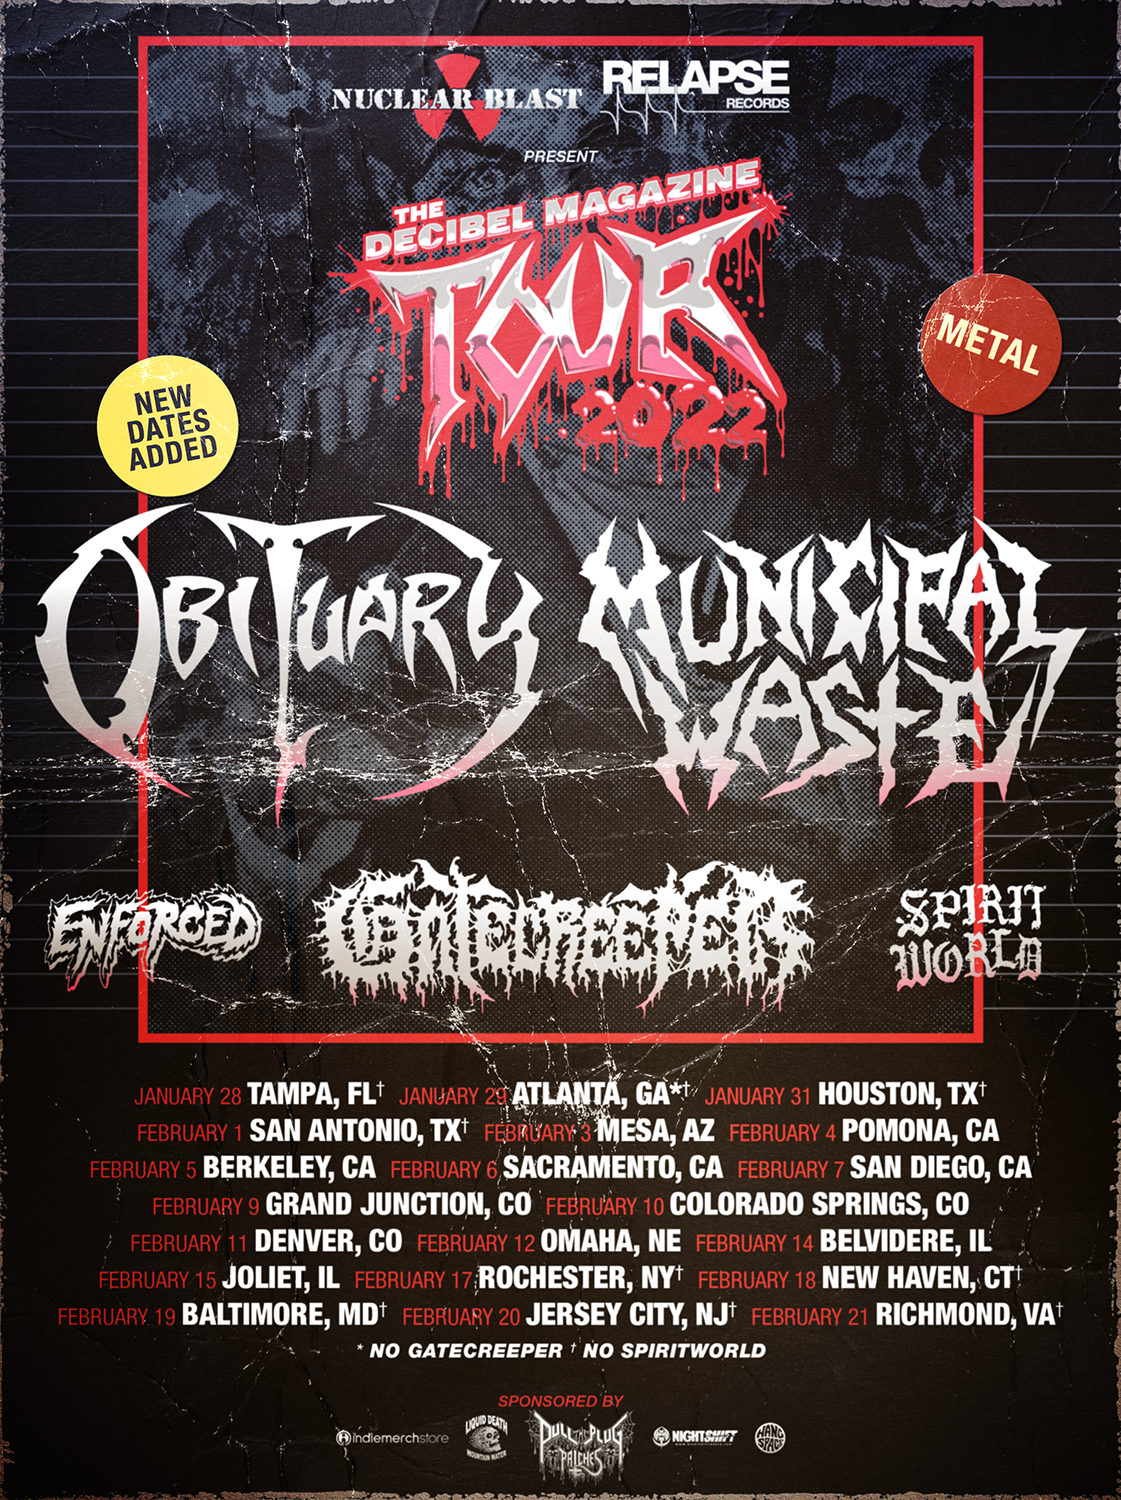 More Dates Added to the Decibel Magazine Tour 2022 Featuring OBITUARY, MUNICIPAL WASTE, GATECREEPER & ENFORCED!